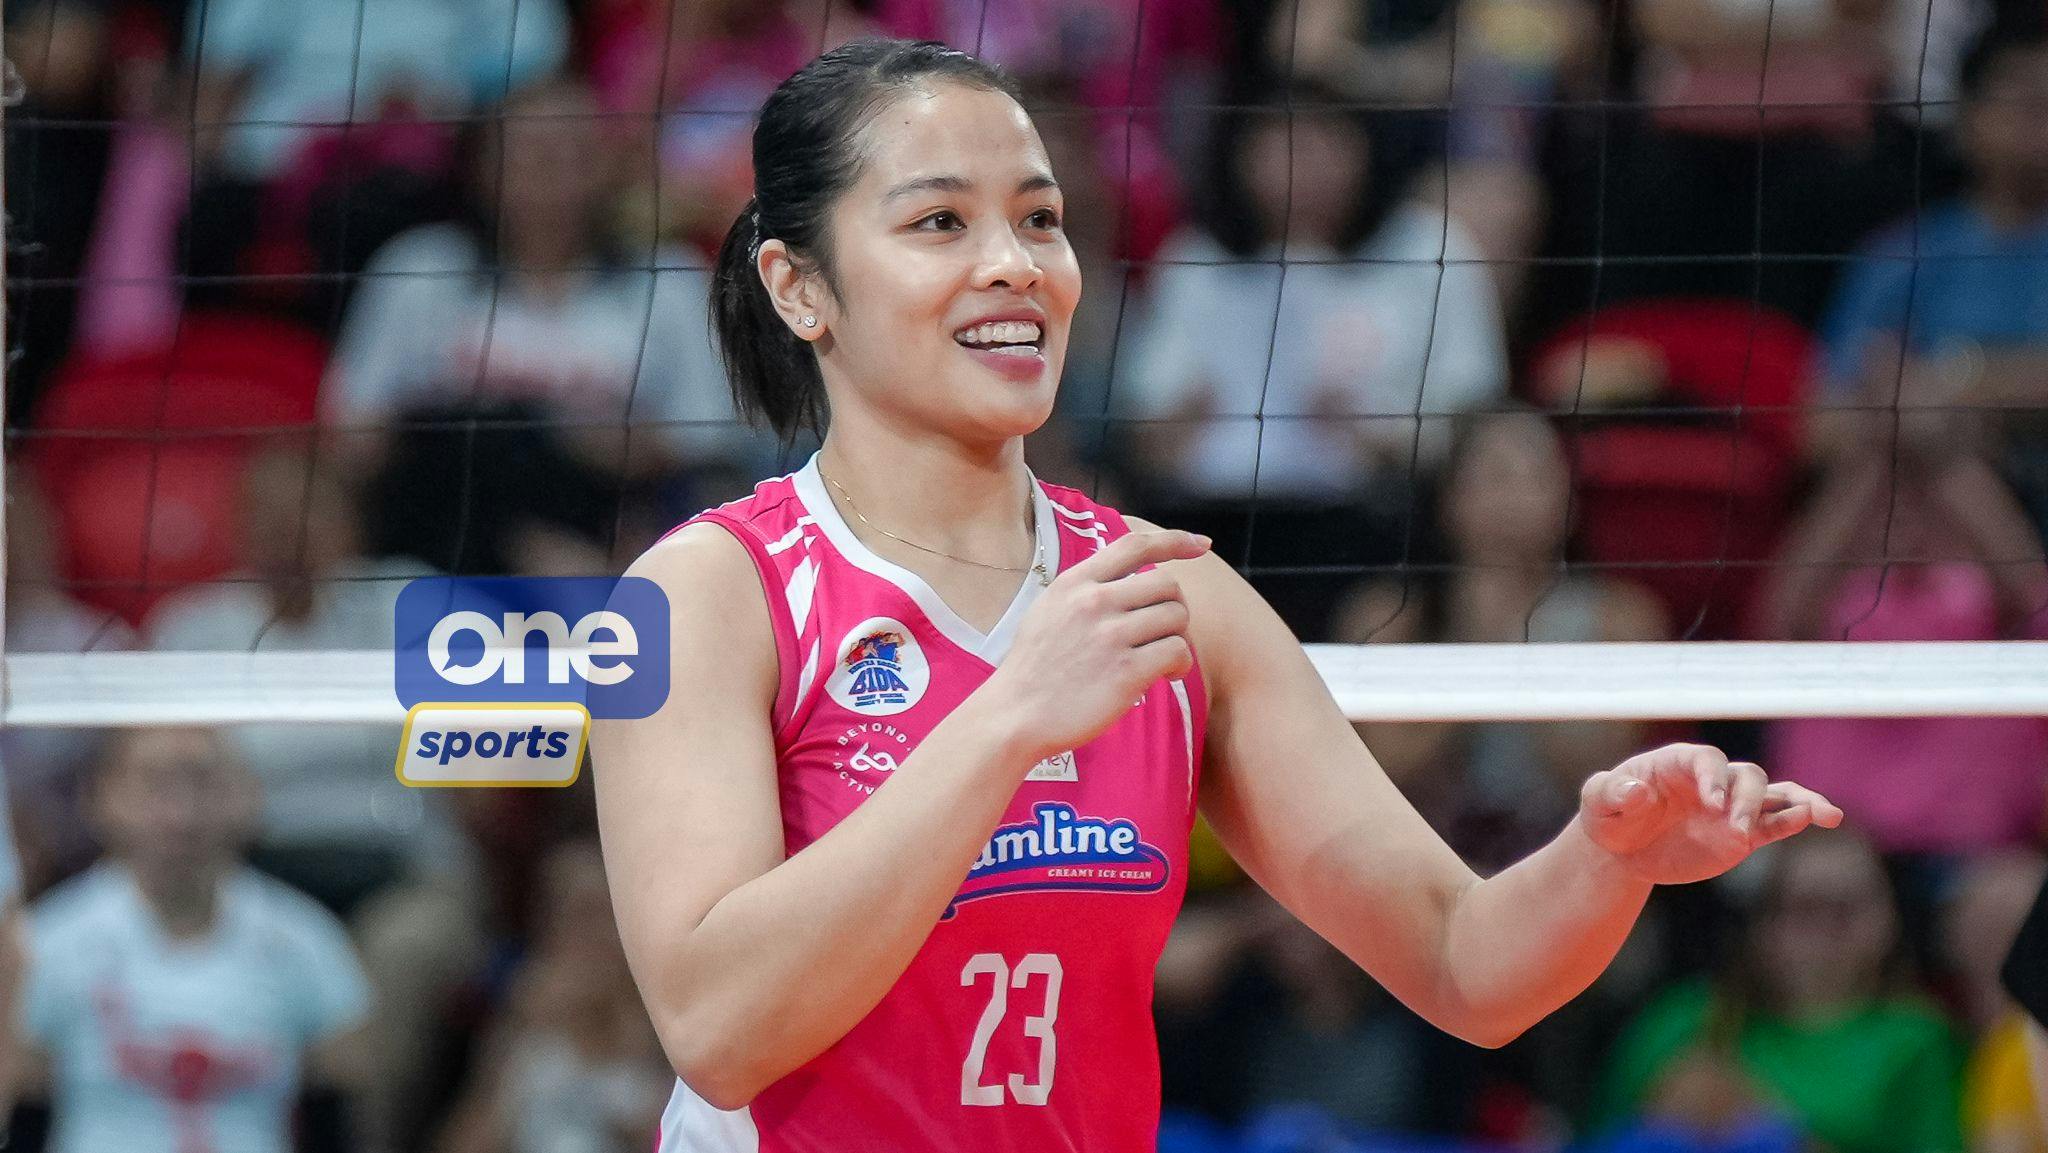 PVL: Jema Galanza, Creamline rise above doubts, bank on trust to defeat Petro Gazz